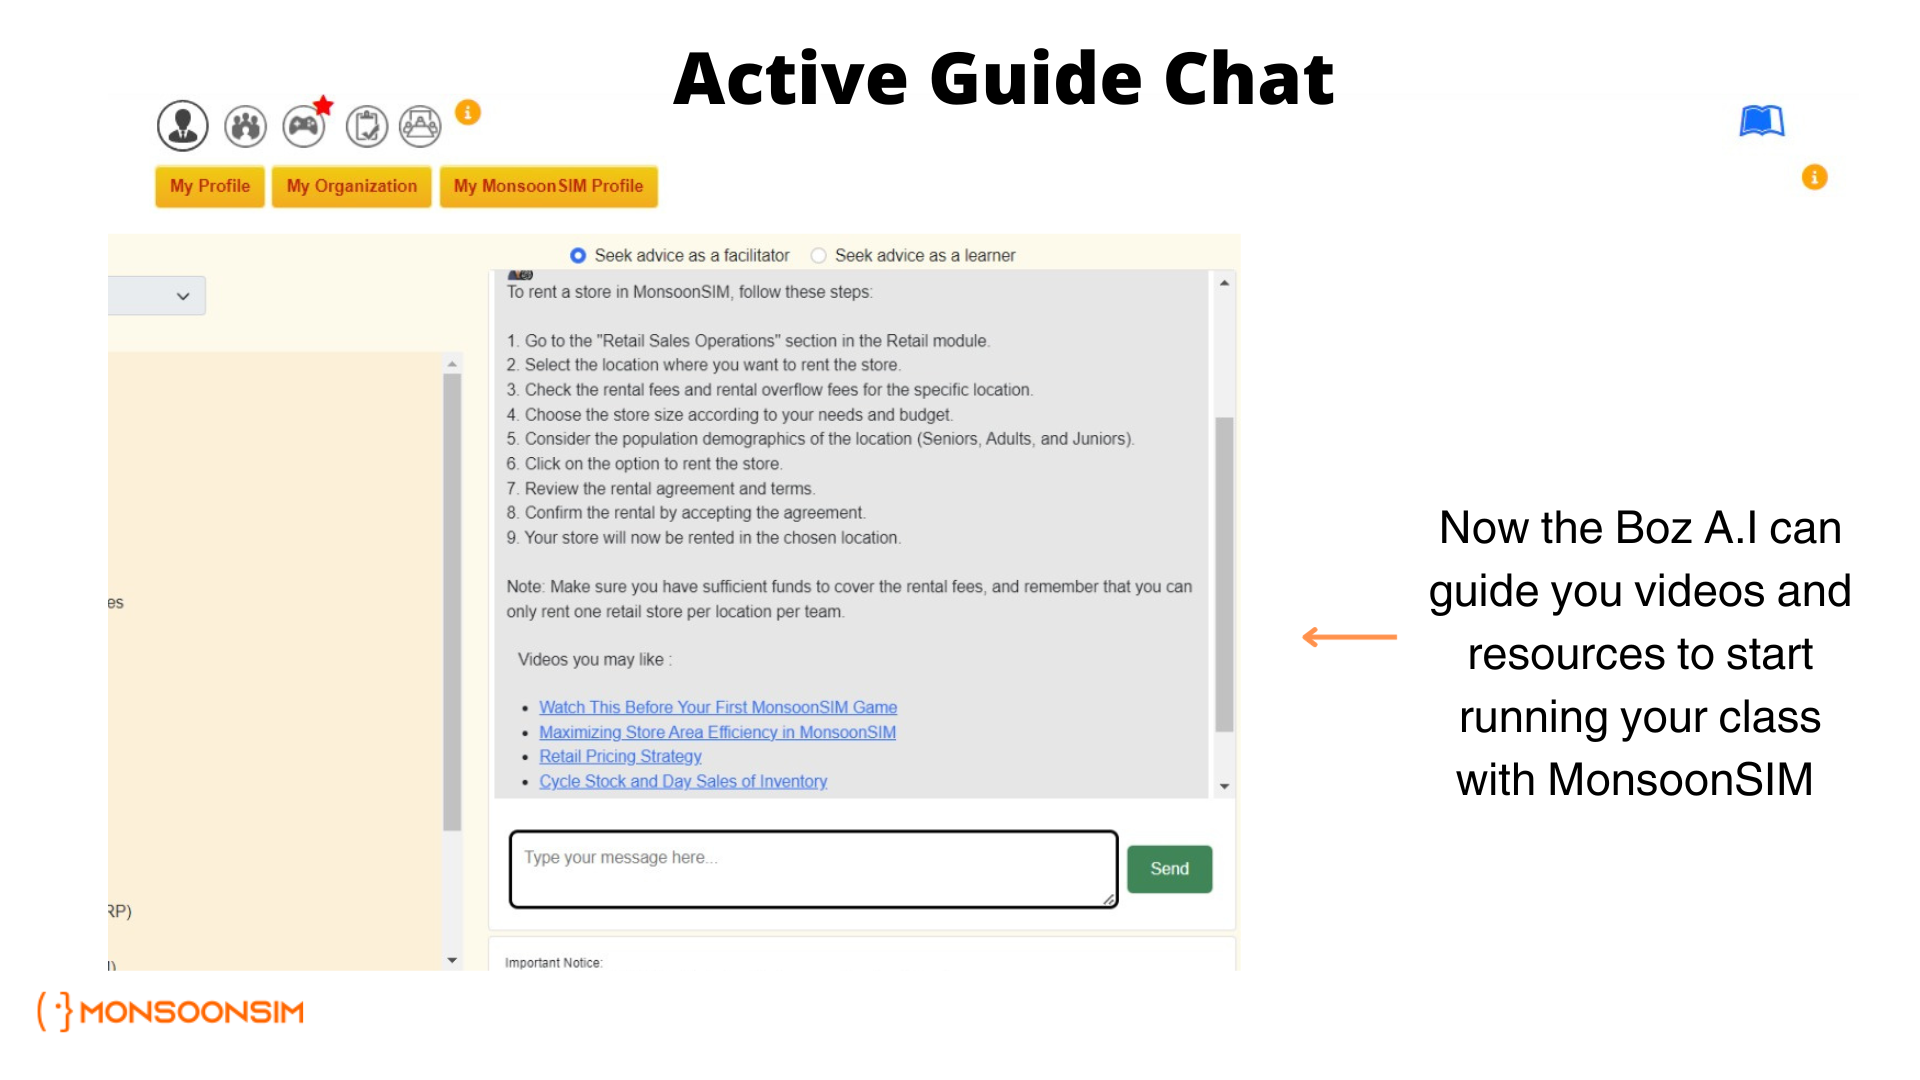 Screenshot of MonsoonSIM's Active Guide Chat feature. The interface includes tabs for 'My Profile', 'My Organization', and 'My MonsoonSIM Profile' at the top. The main panel shows options to 'Seek advice as a facilitator' or 'Seek advice as a learner'. A list of steps outlines the process to rent a store within the simulation, including selecting the location and reviewing rental terms. To the right, a highlighted callout box states, 'Now the Boz A.I can guide you videos and resources to start running your class with MonsoonSIM.' At the bottom, there's a message input box for typing queries.